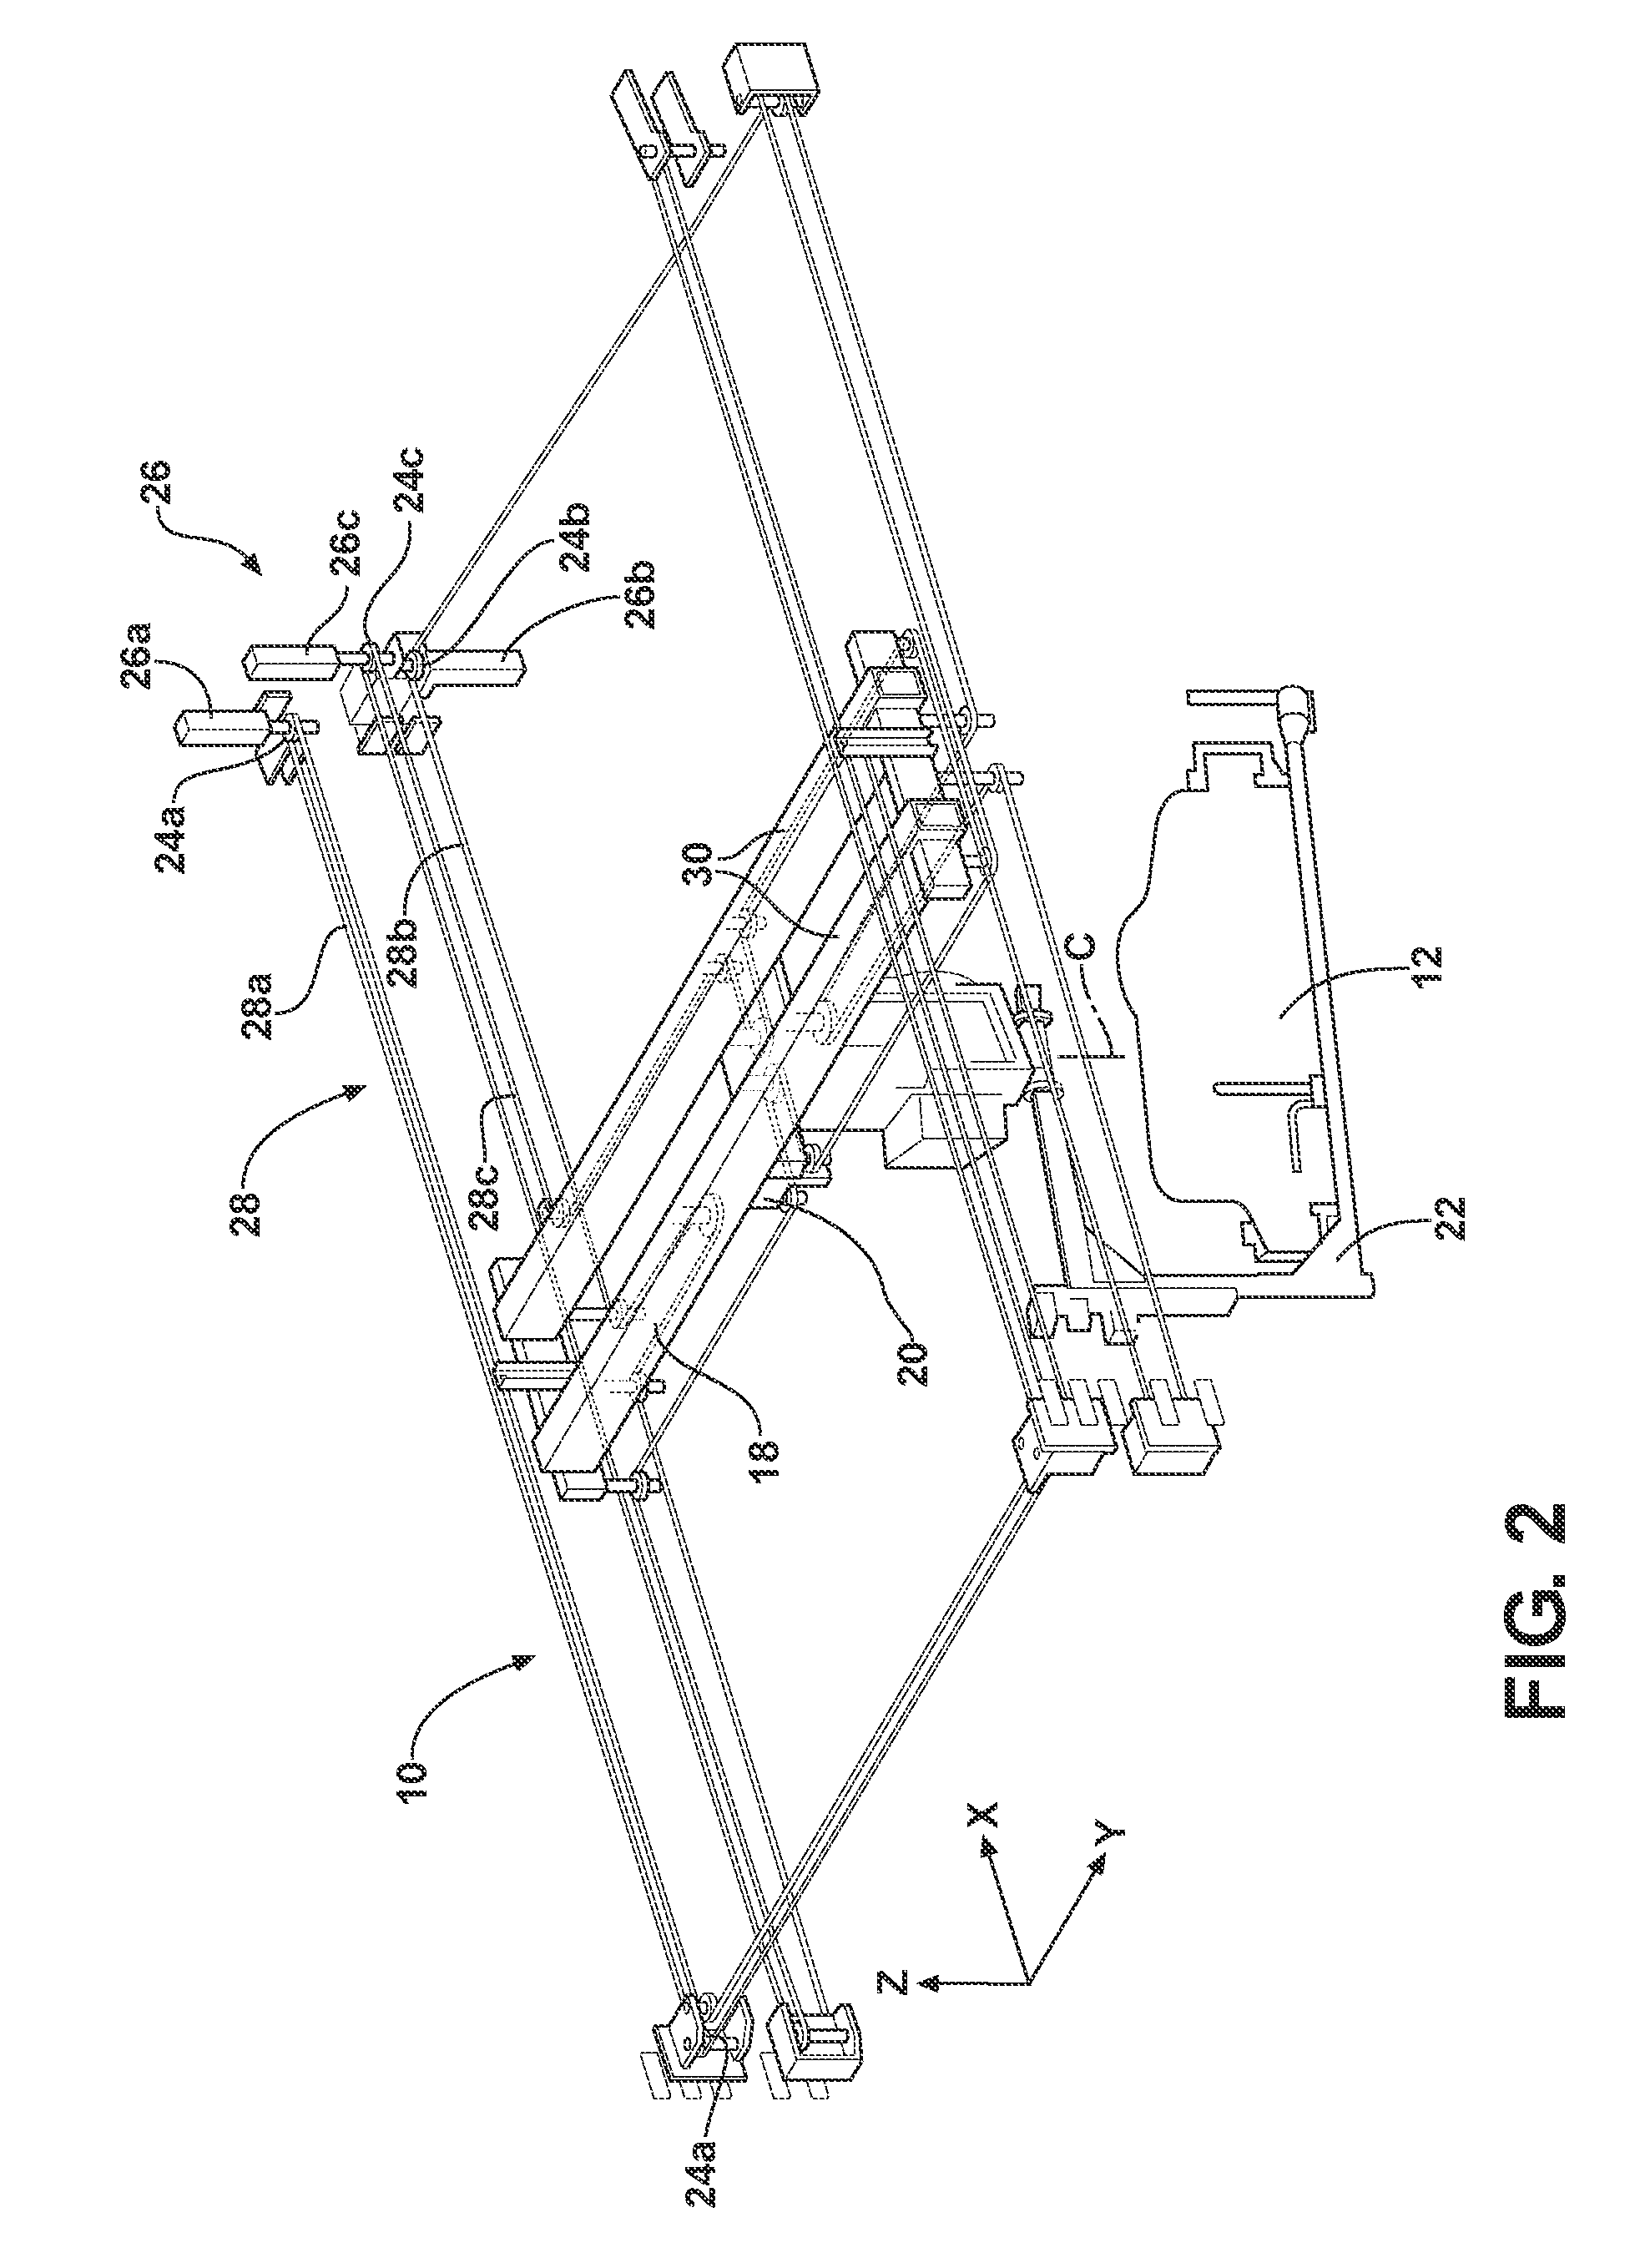 Actuation system configured for moving a payload